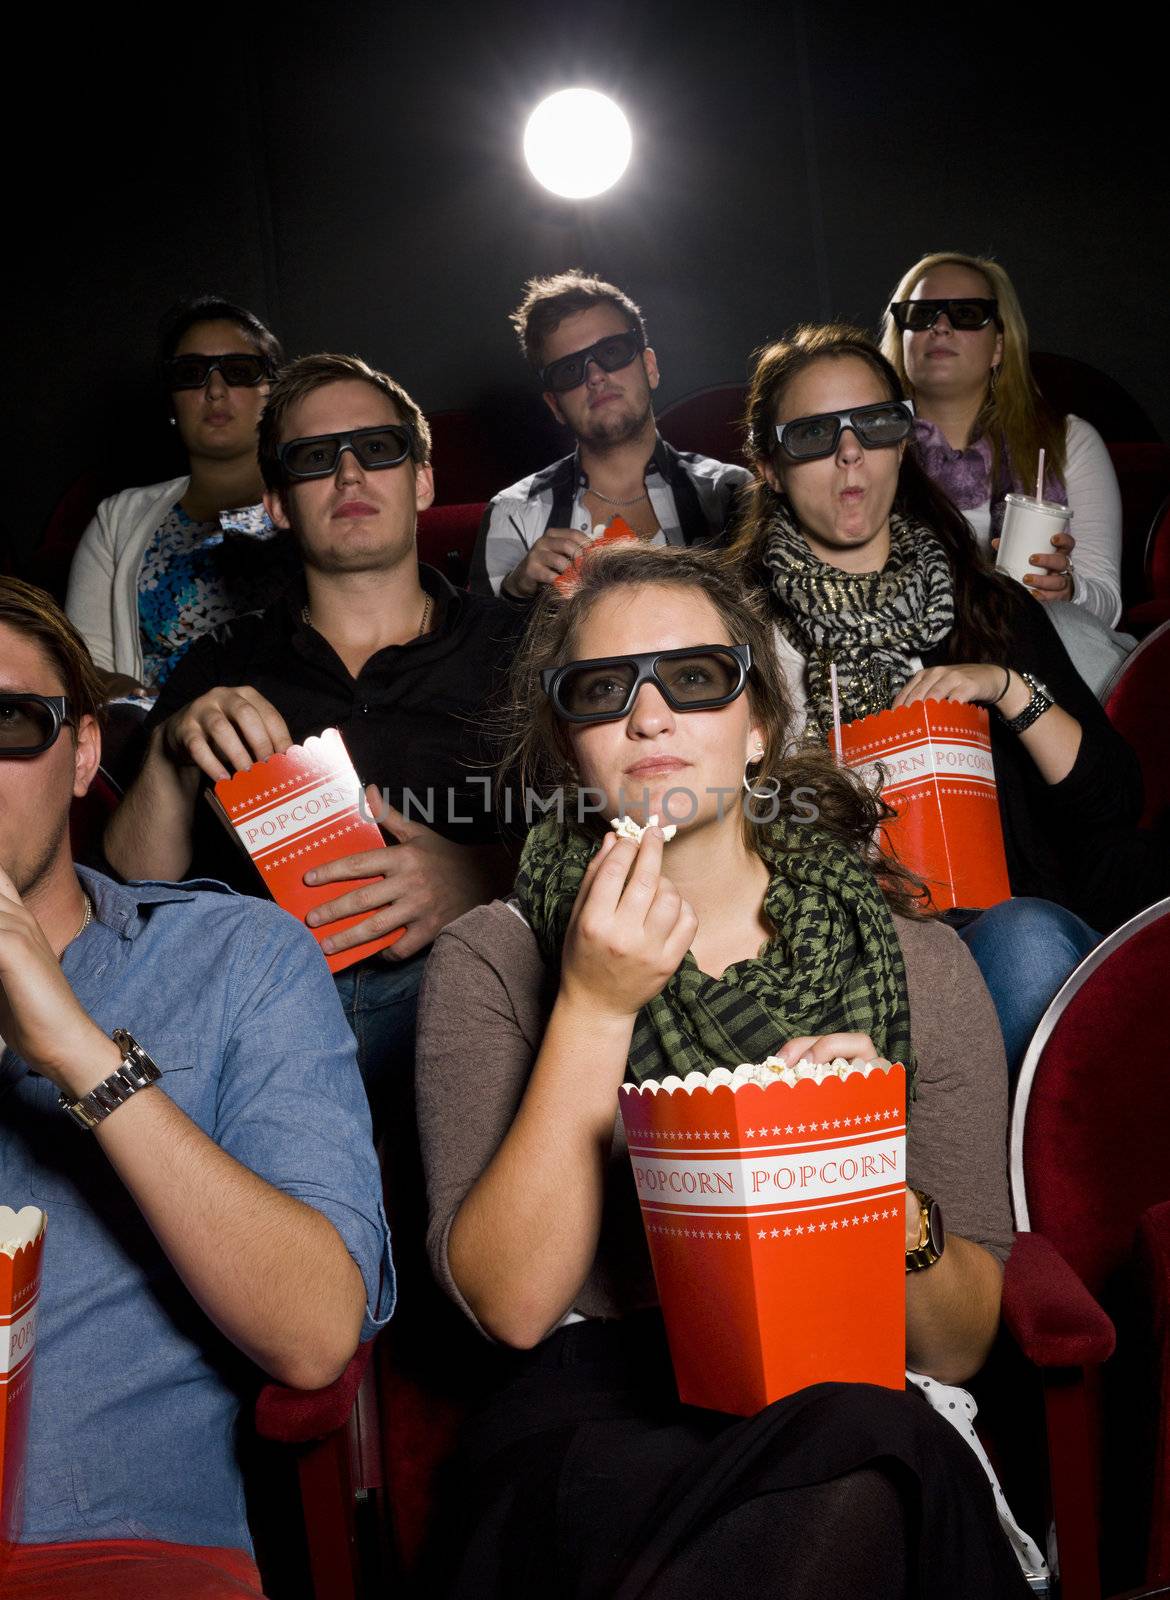 Spectators eating popcorn at the movie theater